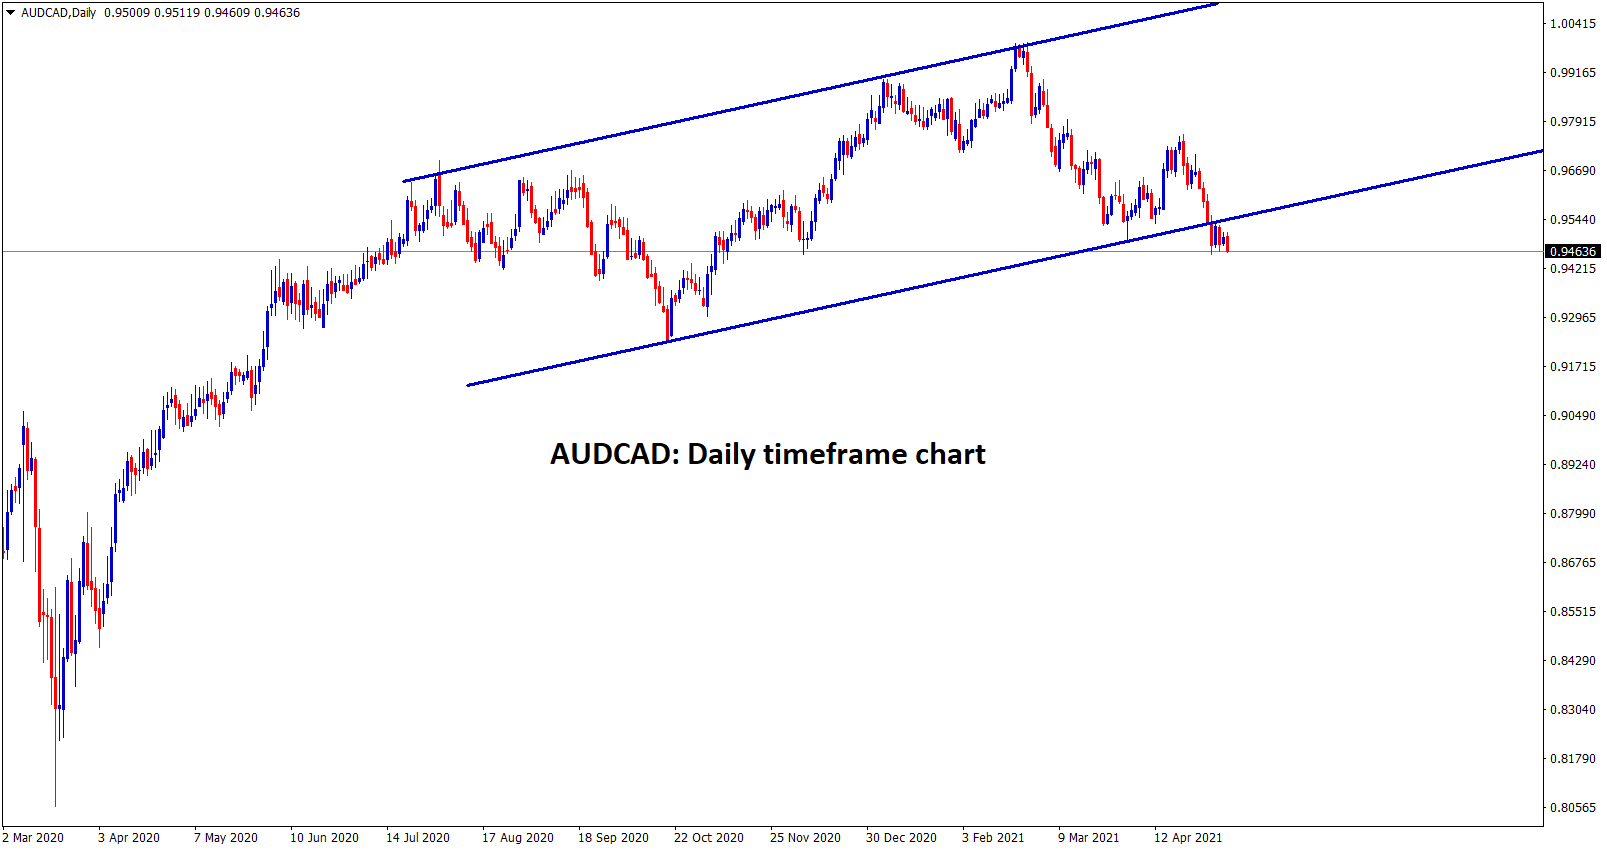 AUDCAD is trying to break the higher low level of an Ascending Channel in the daily timeframe chart